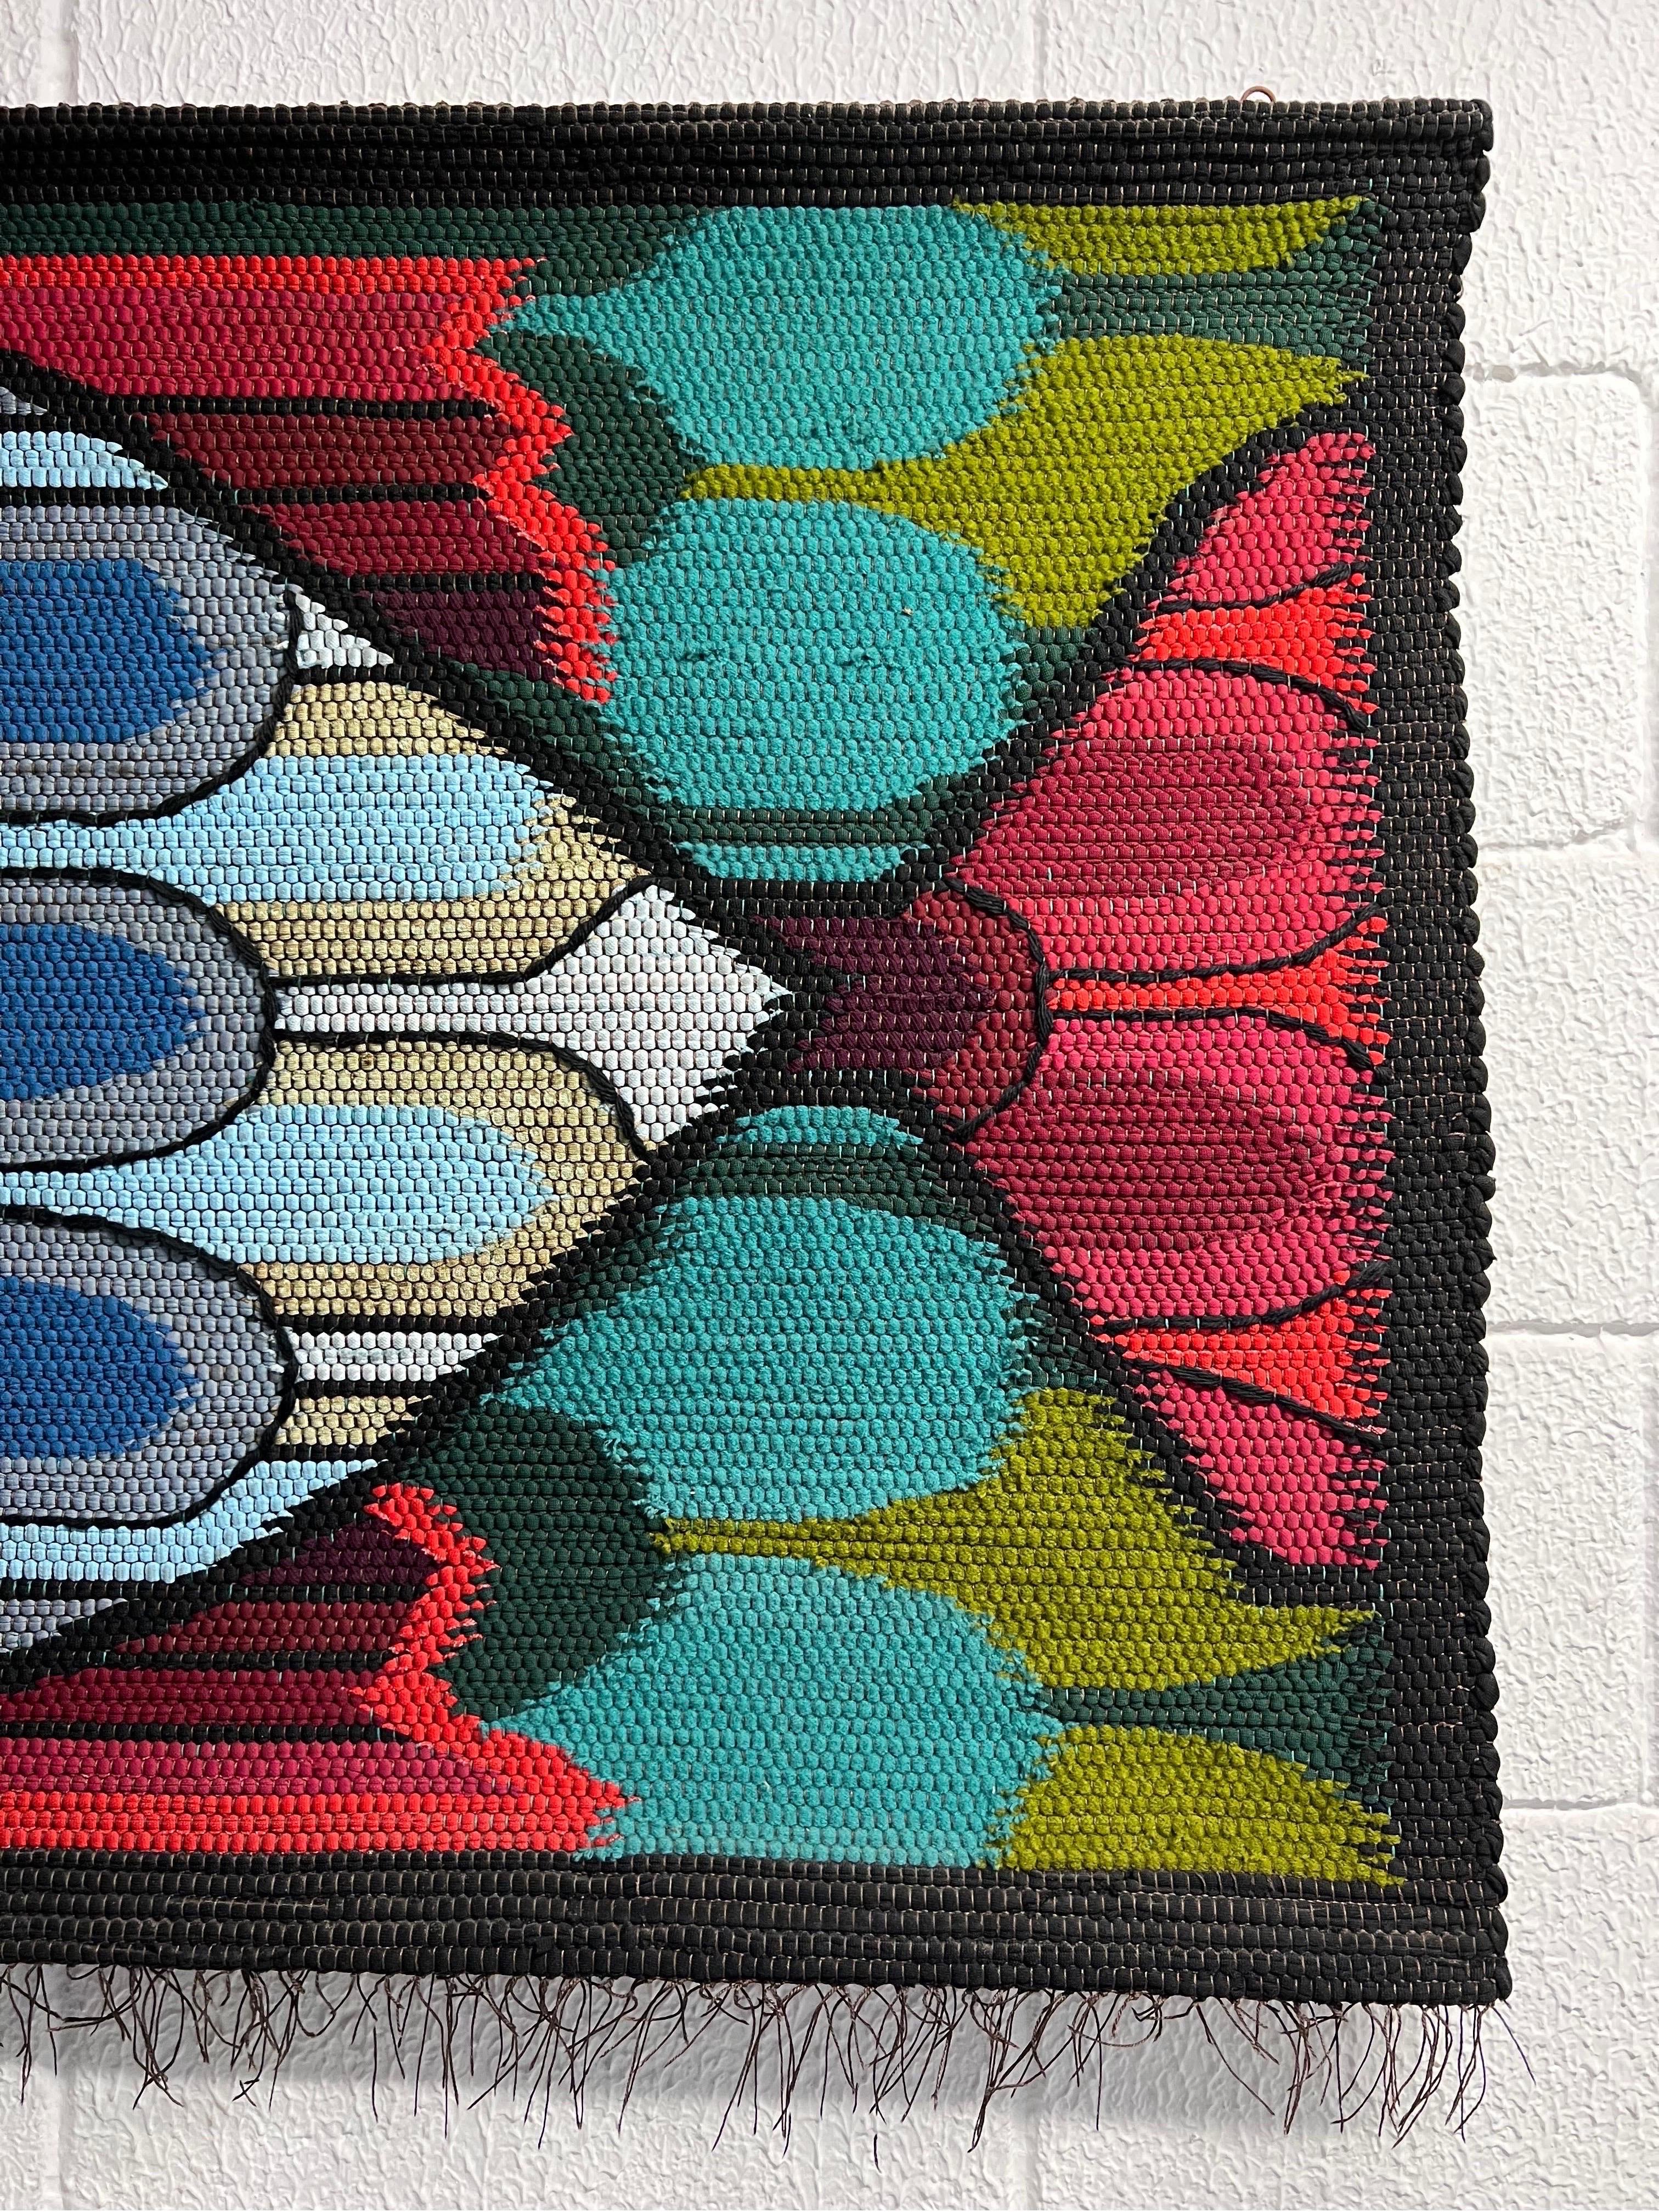 Midcentury Brazilian Modern large scale wall art tapestry of a fish with colorful scales by Eila Ampula, Brazil.